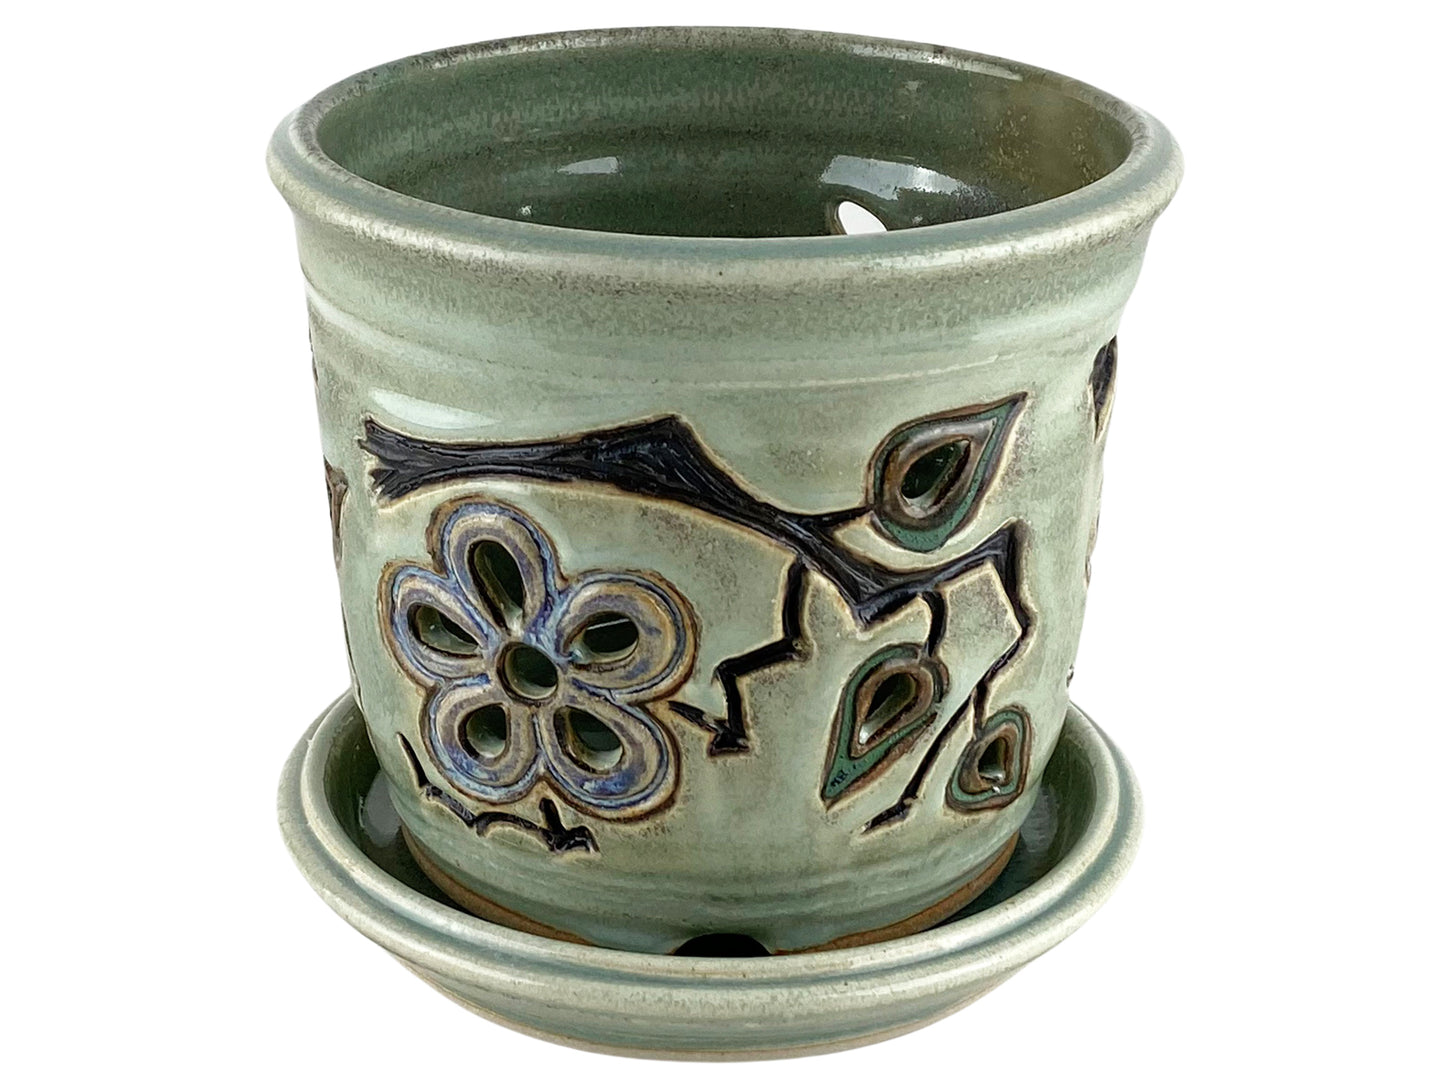 Stoneware Orchid Pot with Cherry Blossom Design